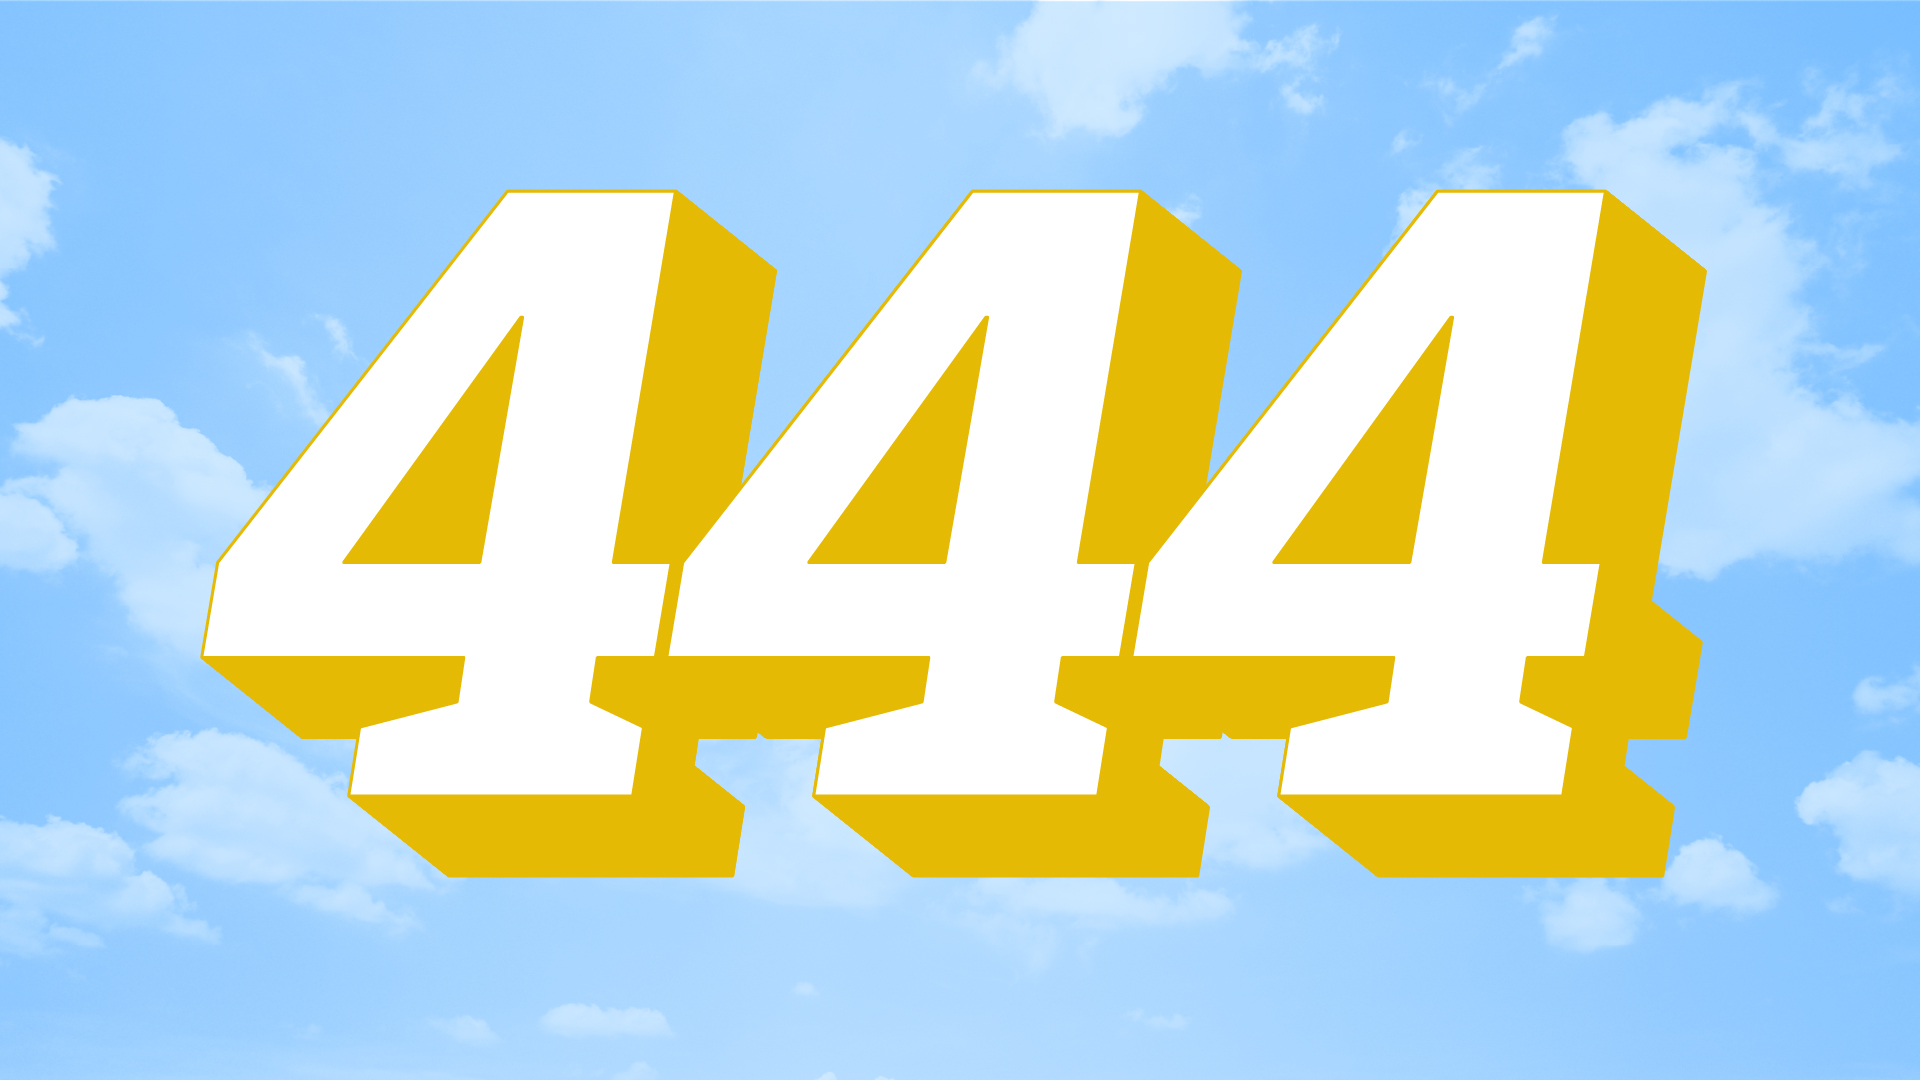 what does 444 mean